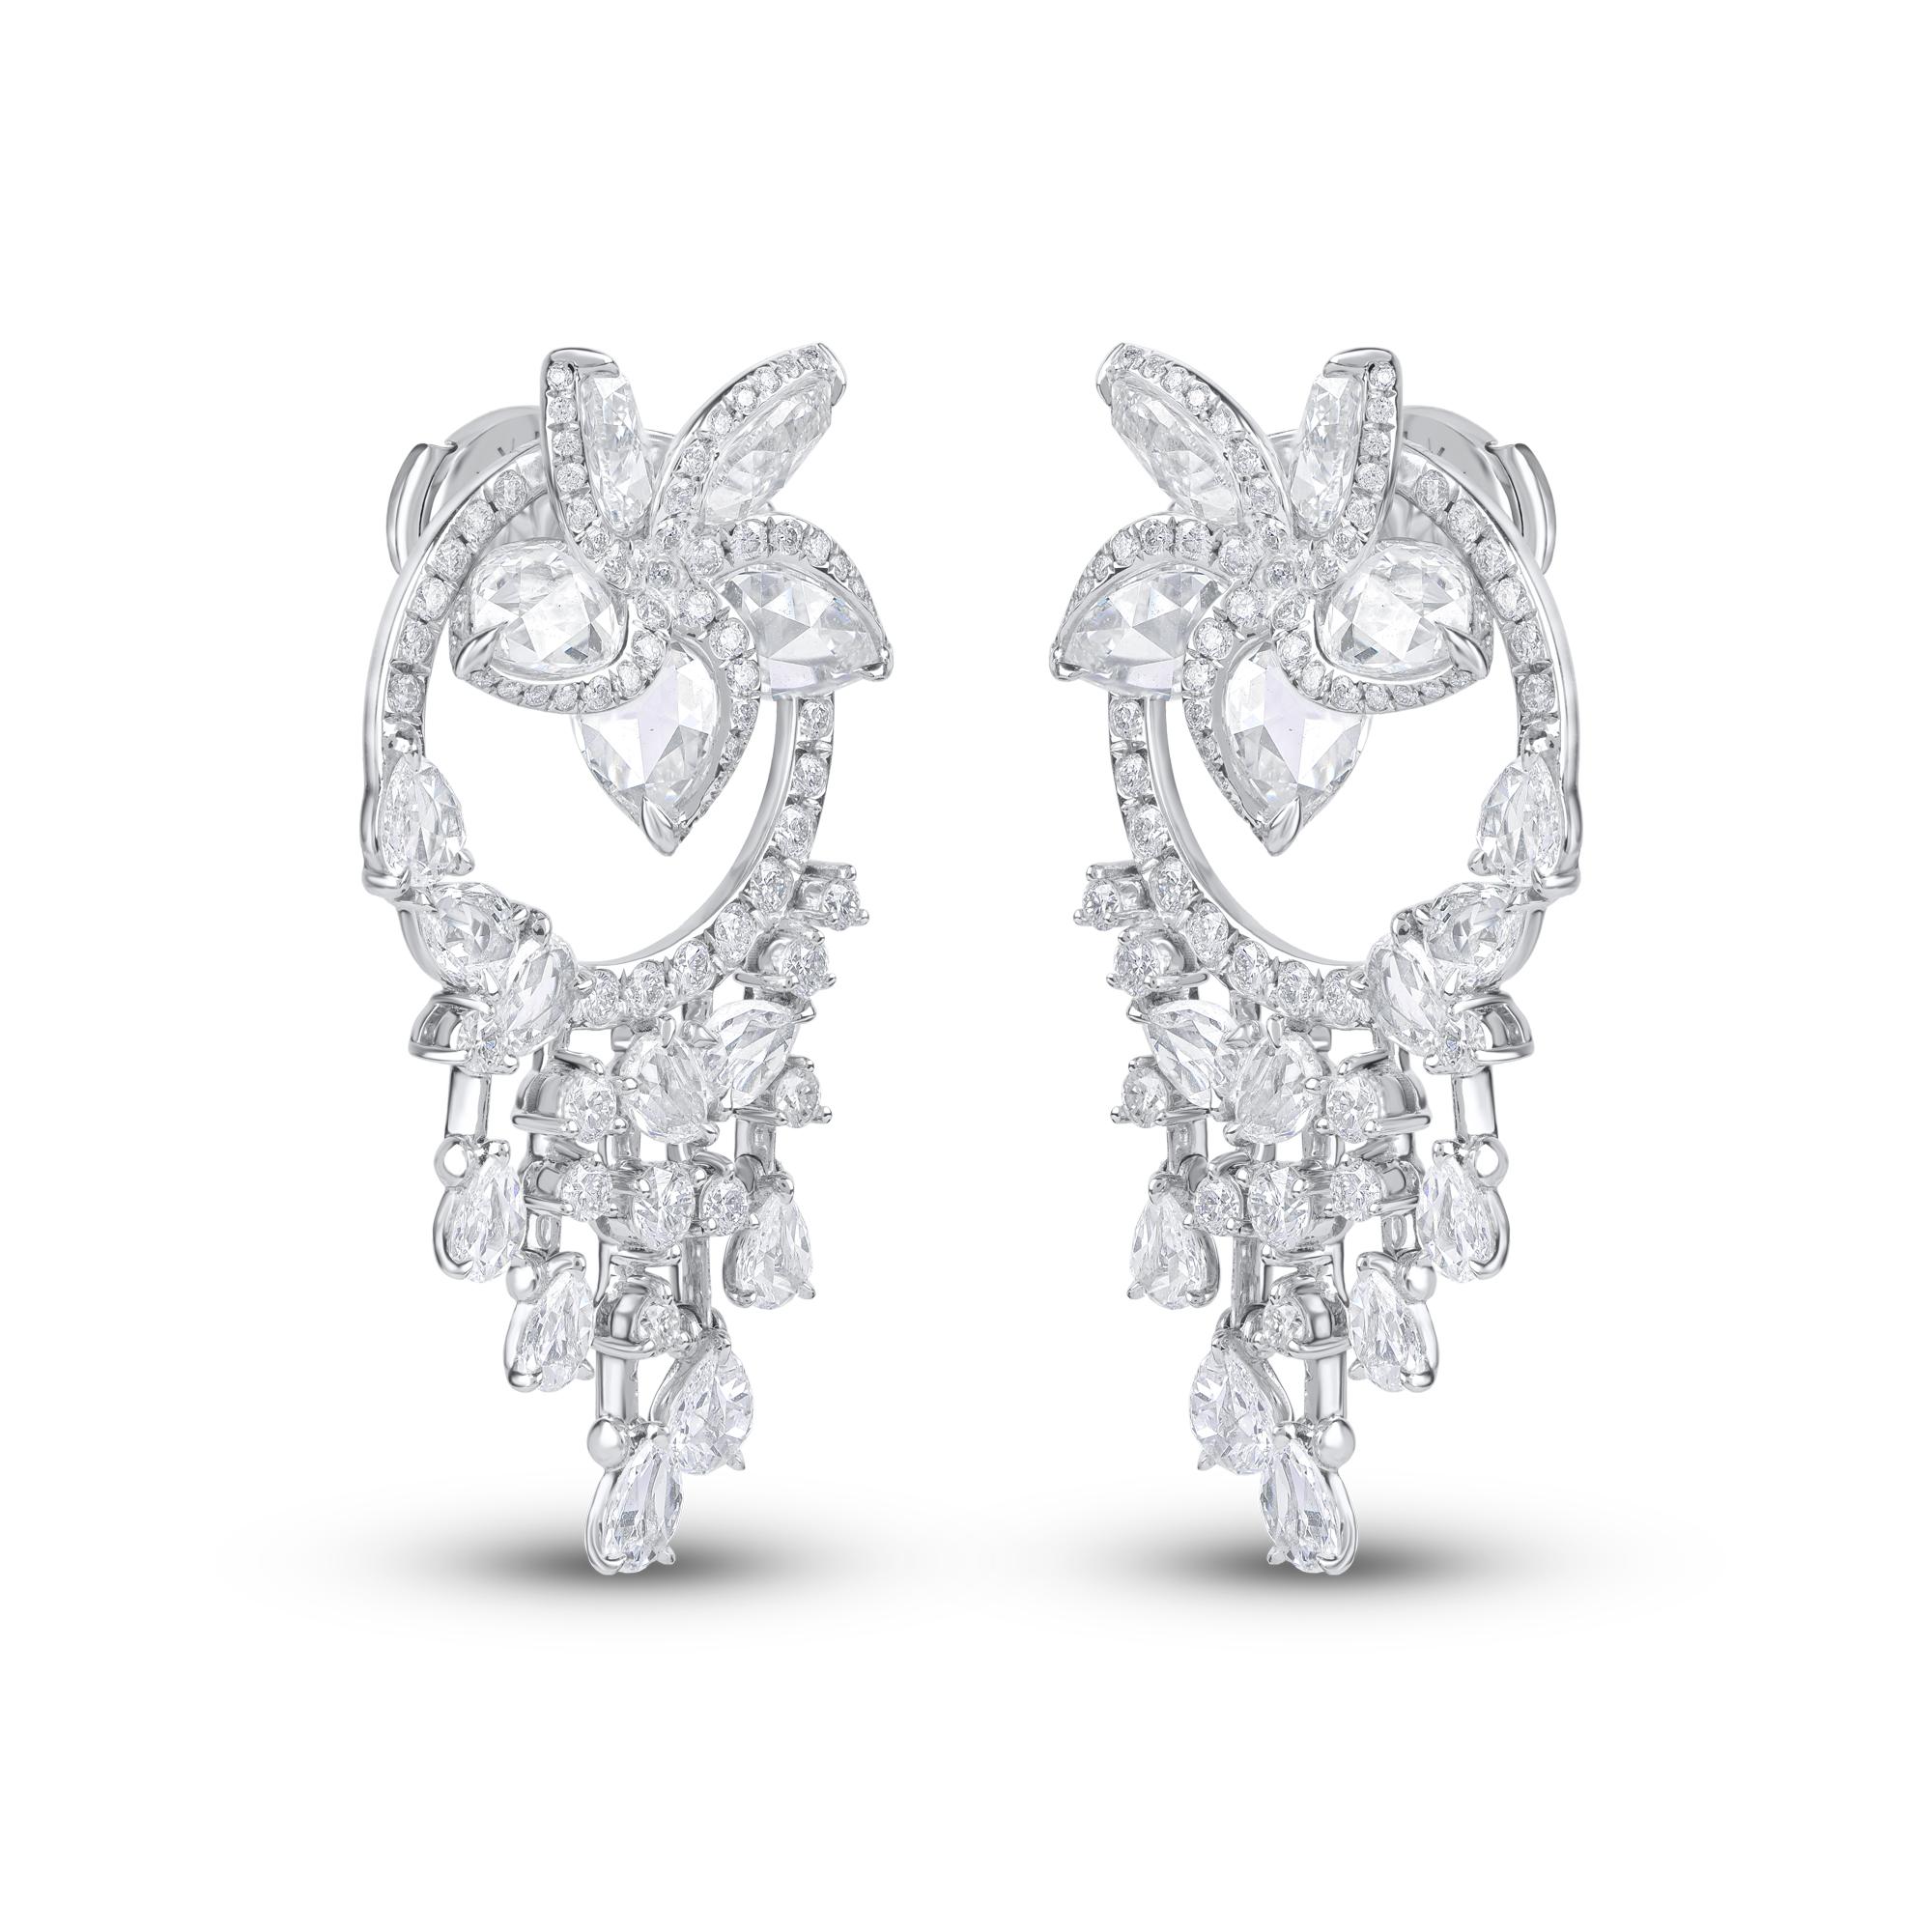 Handcrafted in 18 kt white gold, these versatile diamond earrings are studded with 140 brilliant cut round diamonds and 30 rose cut pear shaped diamonds. The top portion of the Frangipani Flower is detachable and can be worn on its own to form a